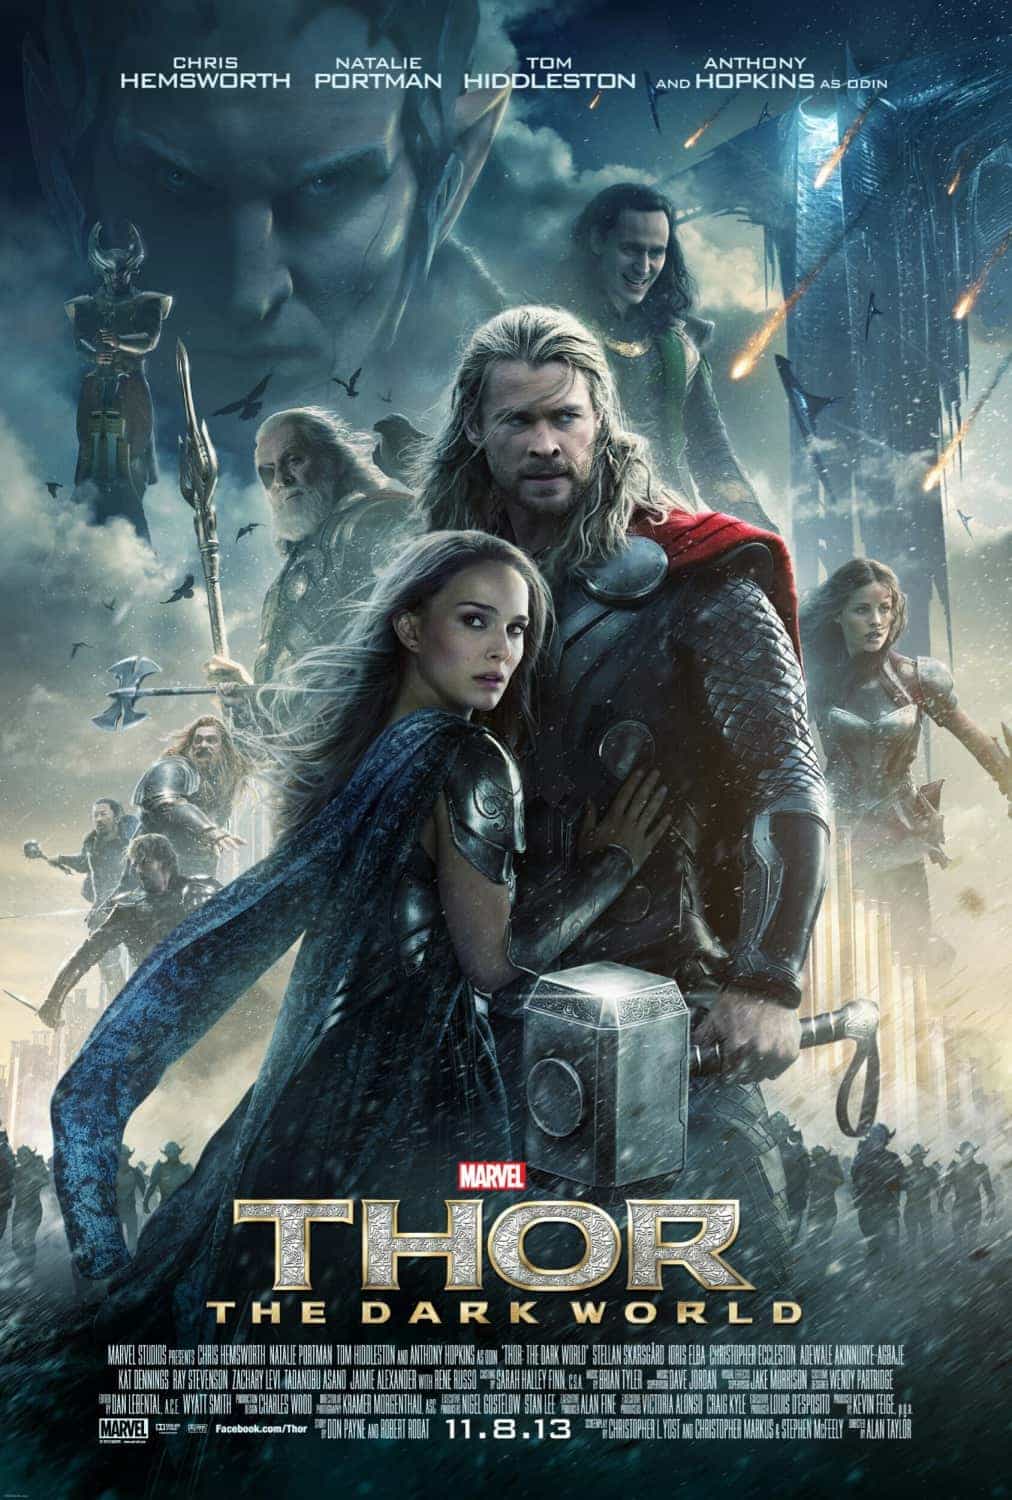 UK DVD/Blu-ray sales 2nd March: Thor: The Dark World is number one 